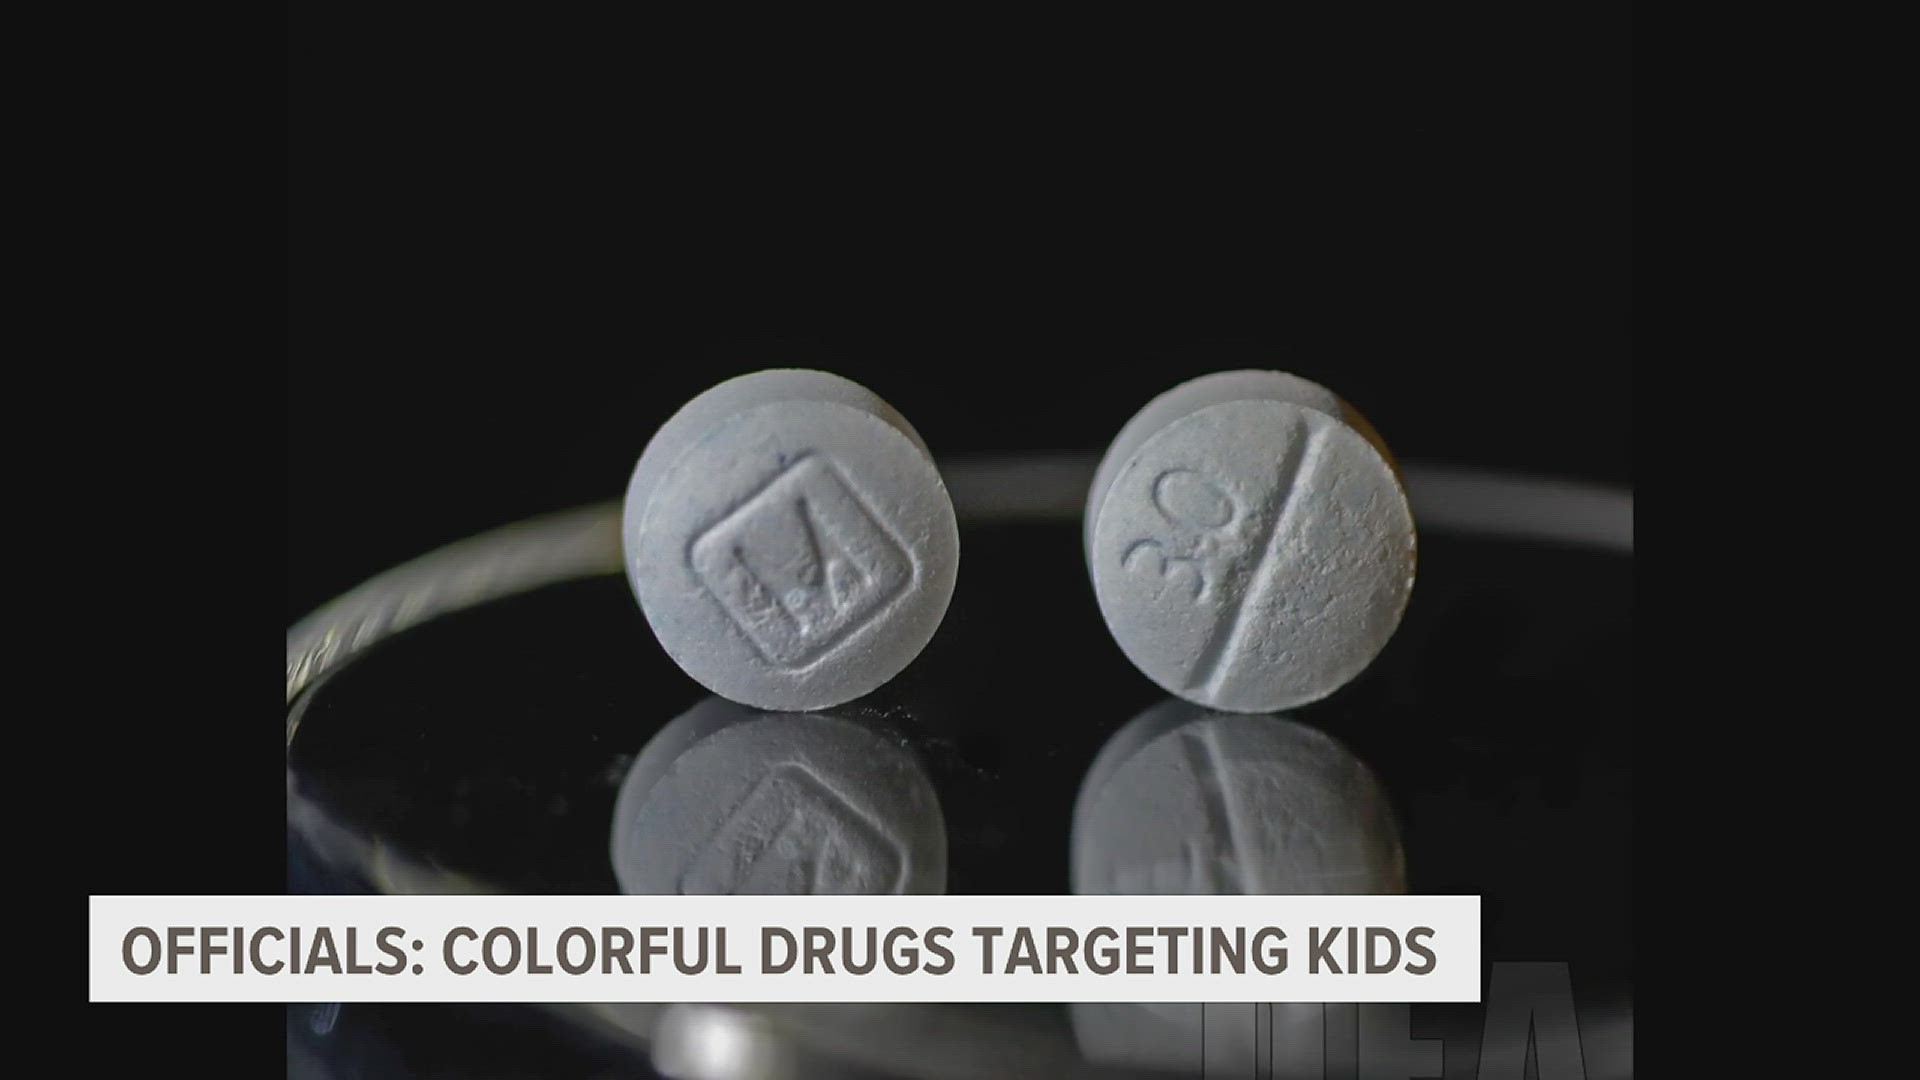 Local police are on alert for colorful fentanyl-laced drugs meant to look like Xanax and Oxycodone. Organizations are sharing how they're detecting the drugs.